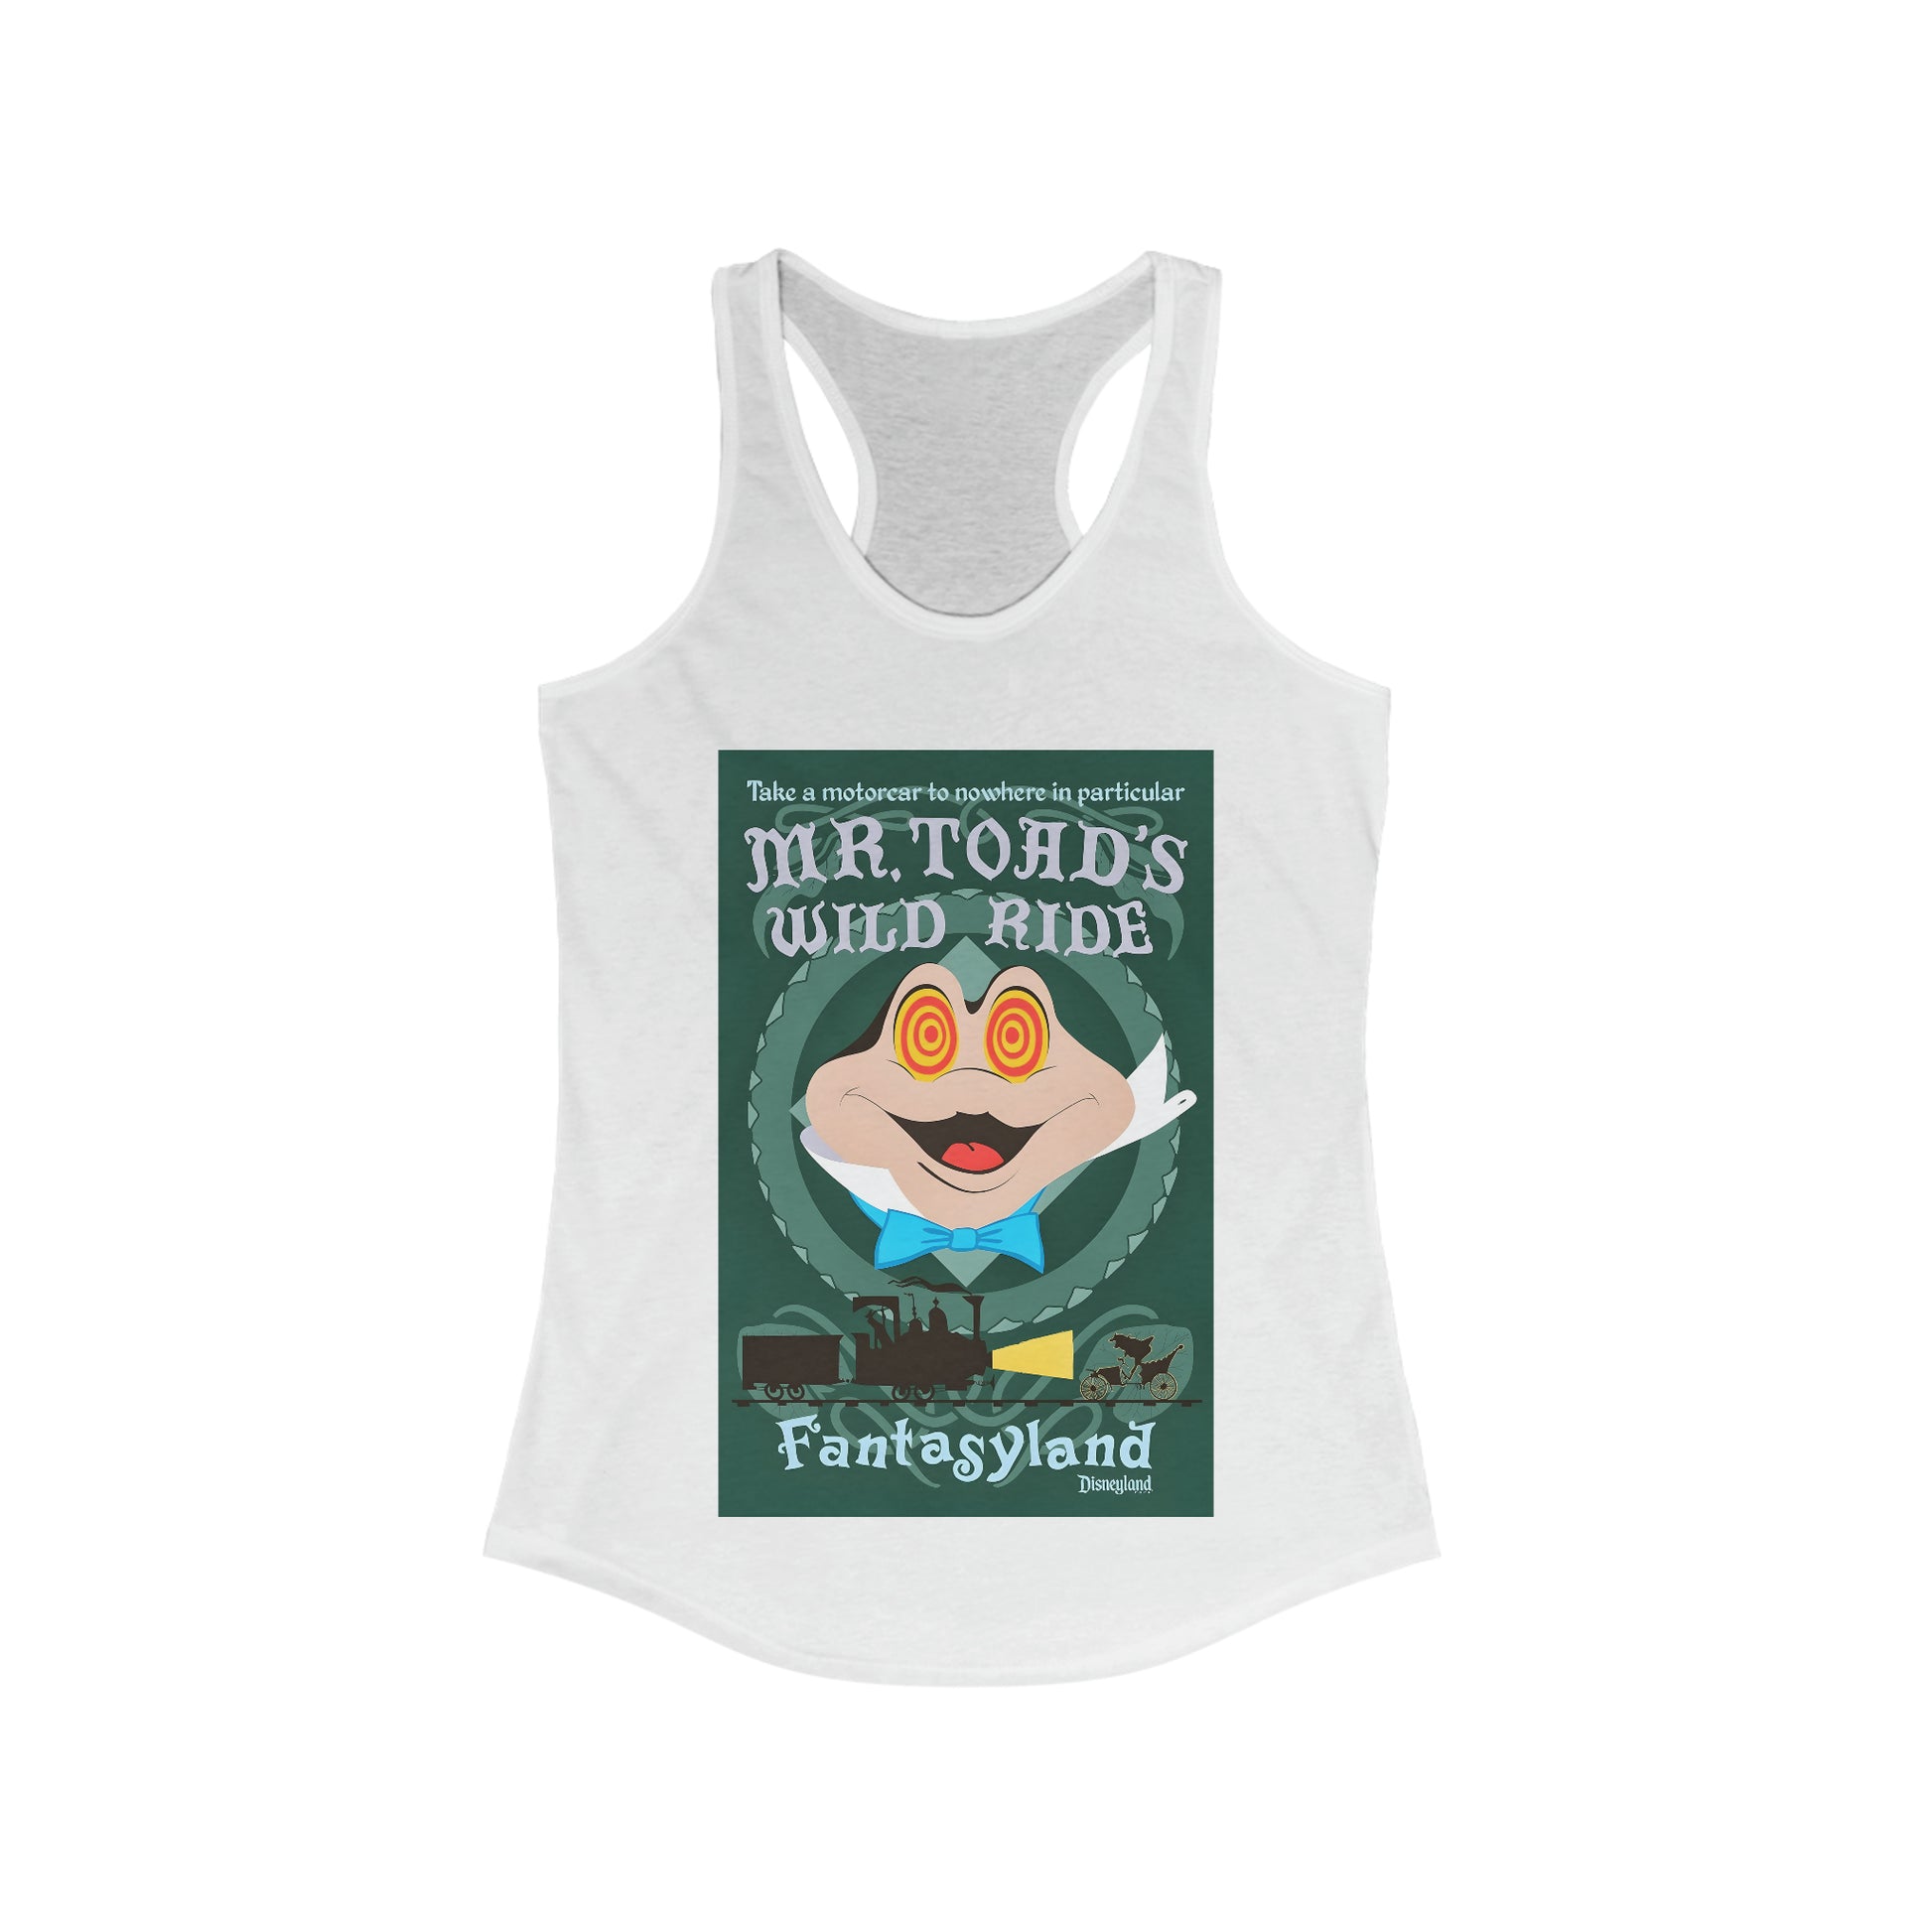 Mr. Toad's Wild ride T-shirt tank top